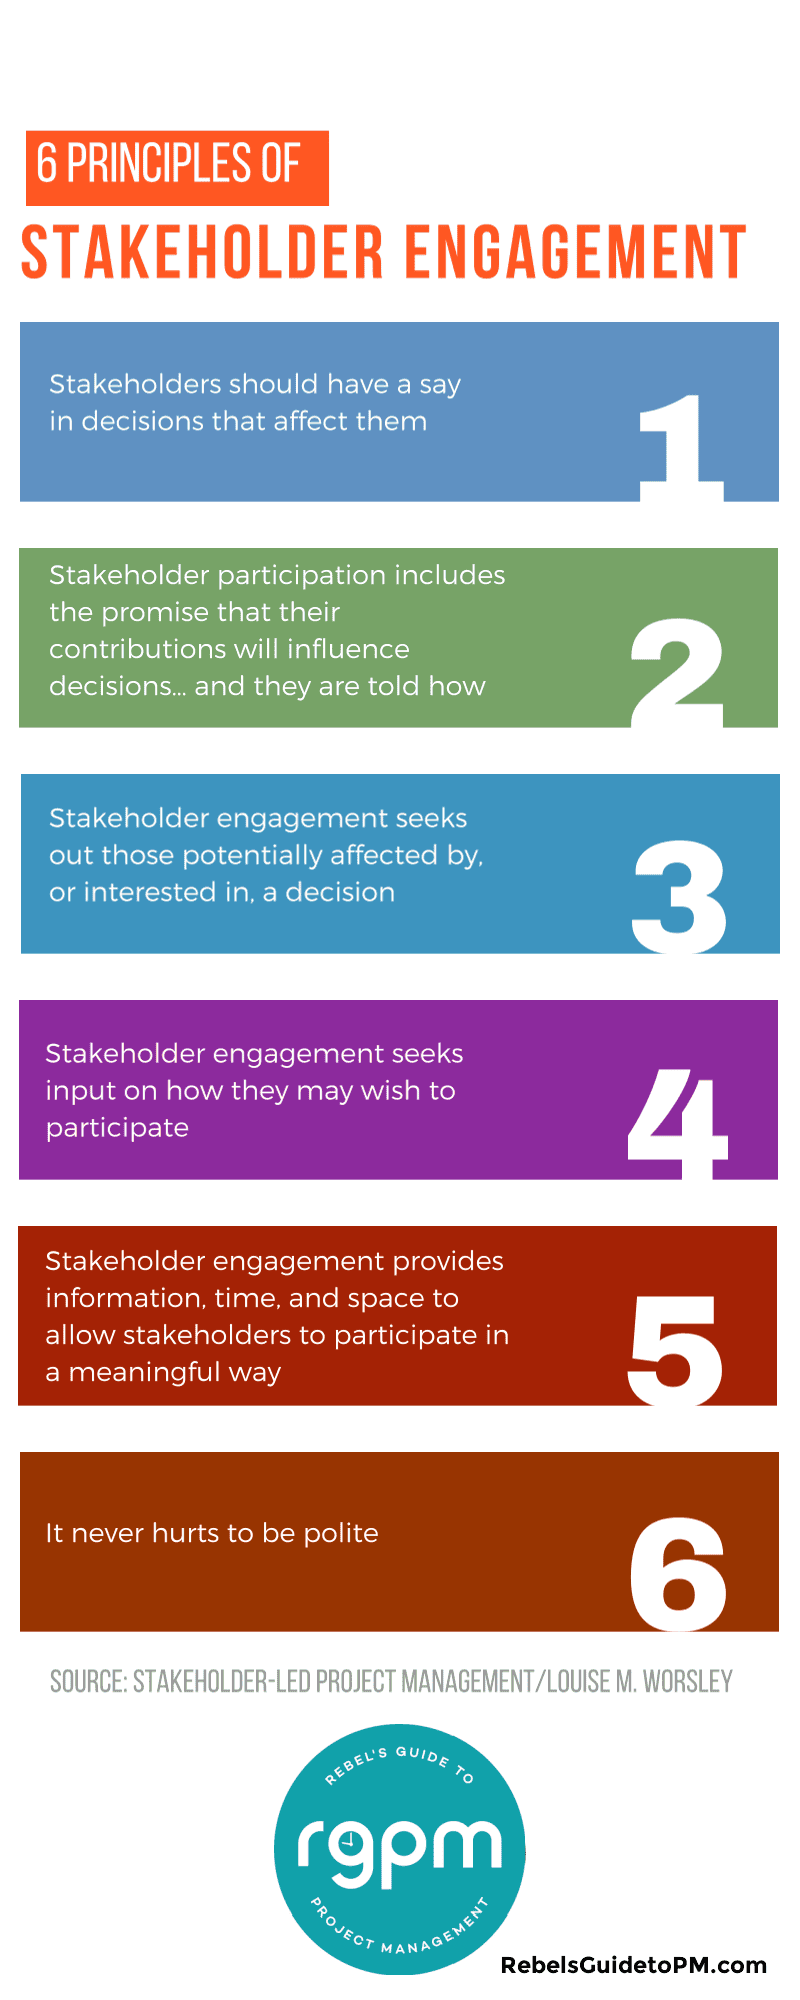 6 principles of stakeholder engagement infographic